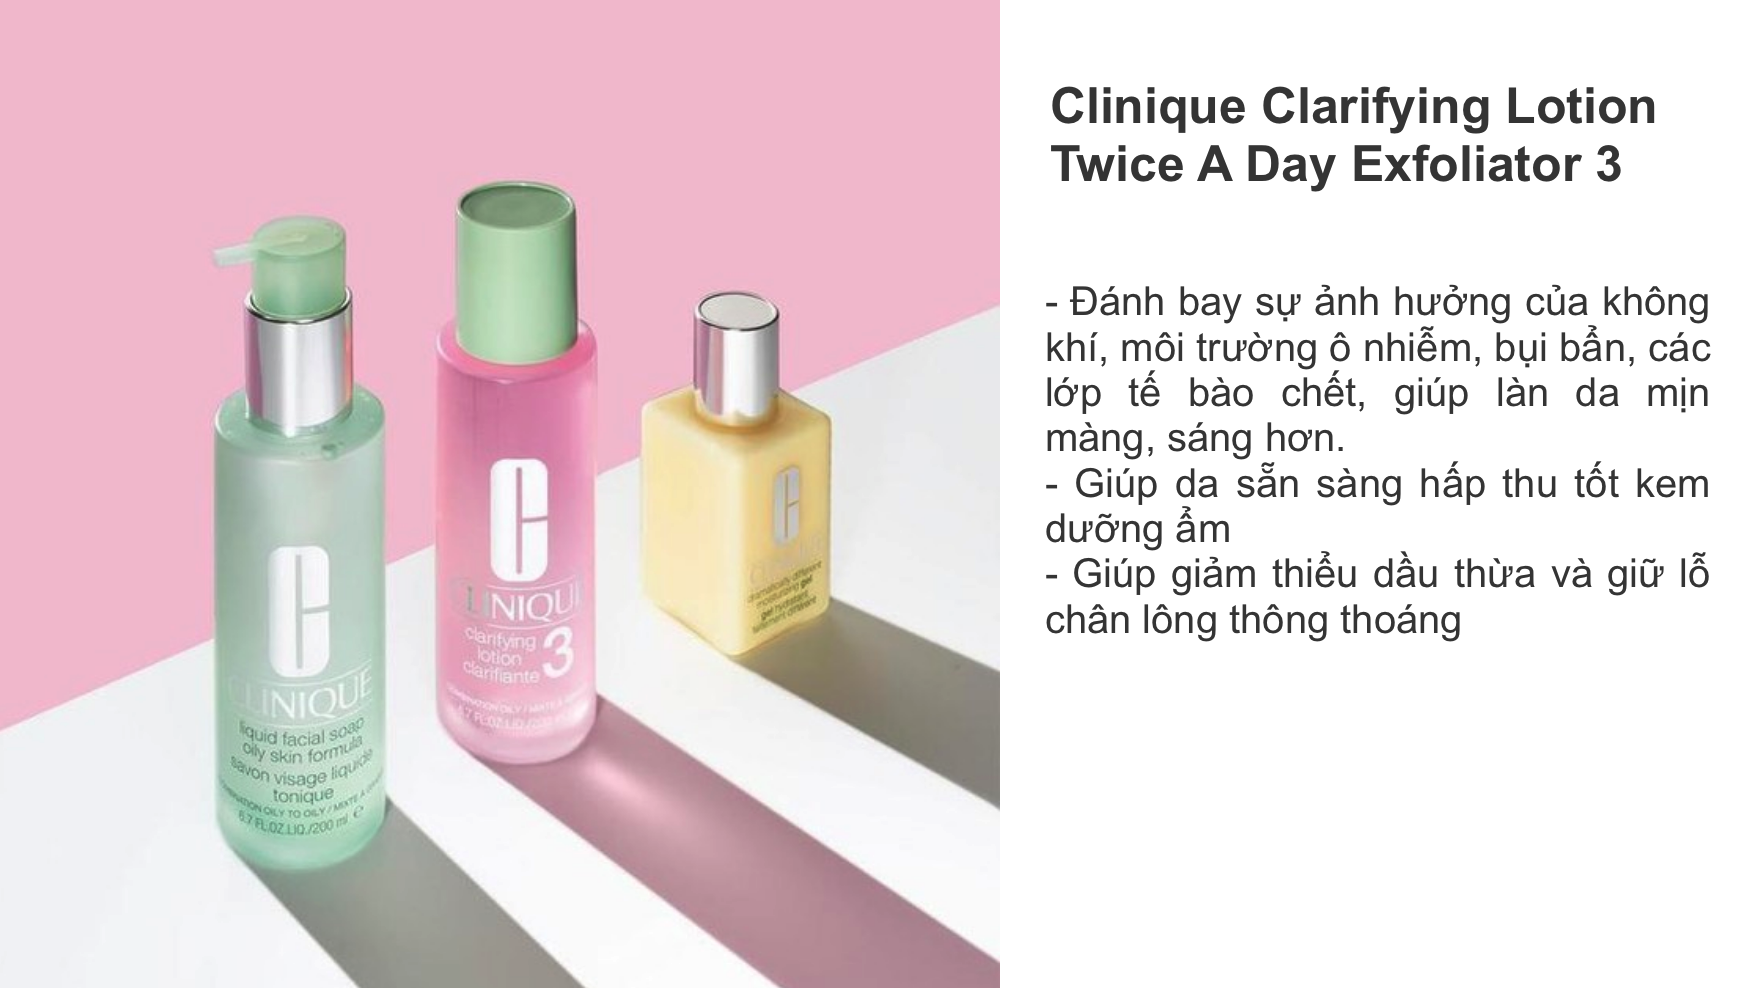 Clinique Clarifying Lotion Twice A Day Exfoliator 3